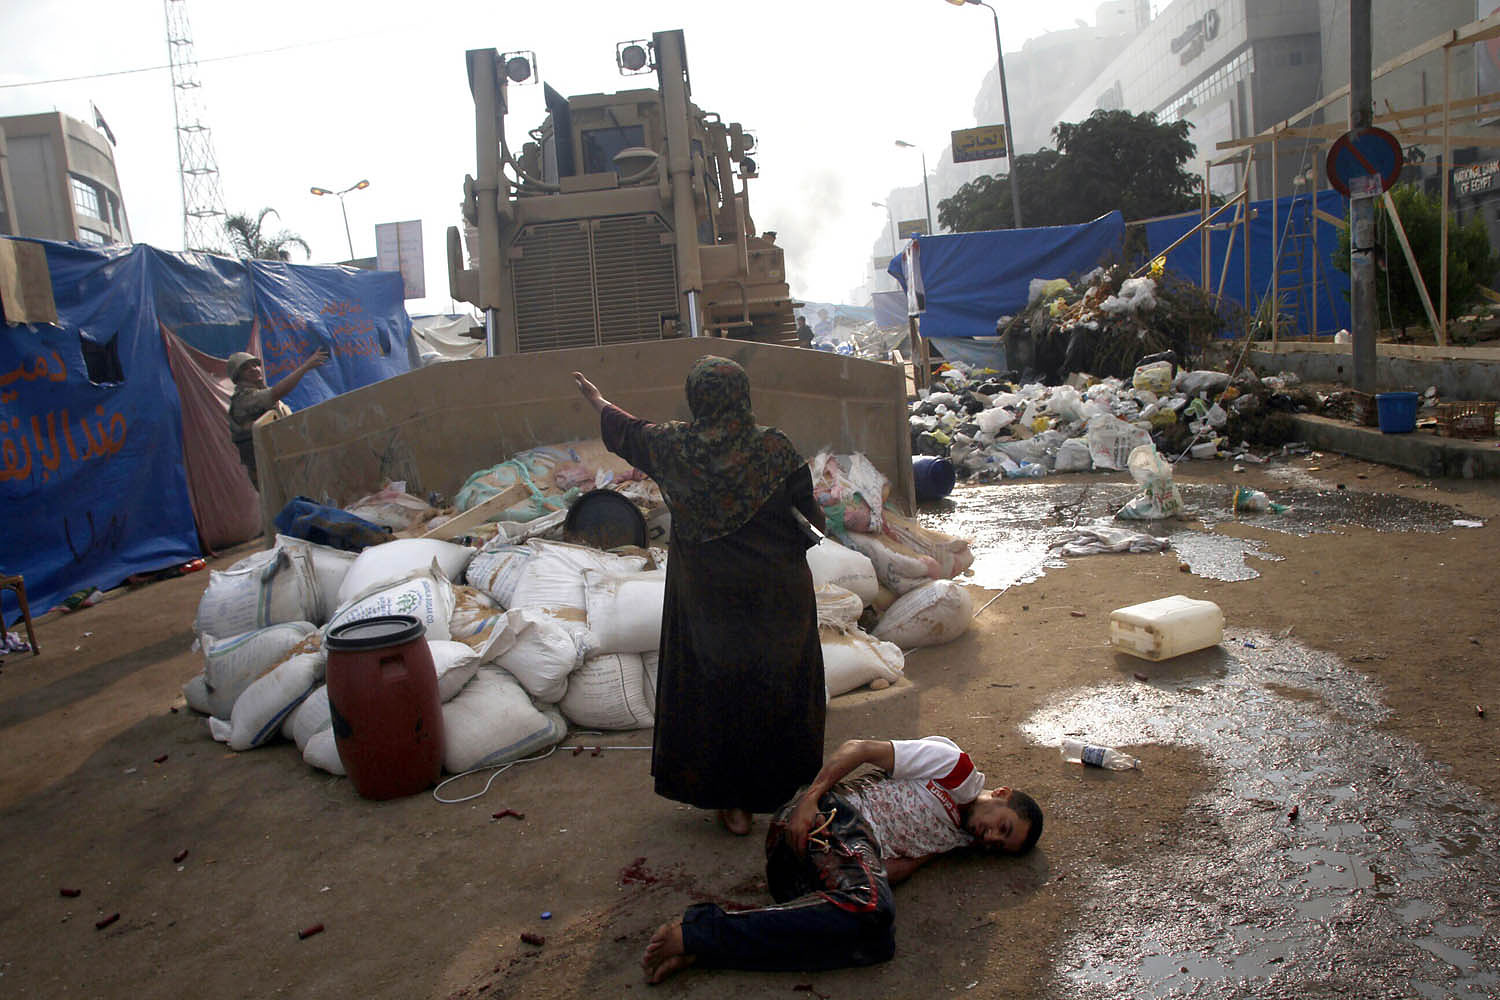 Woman defends a wounded protester from a military bulldozer. Egypt, 2013